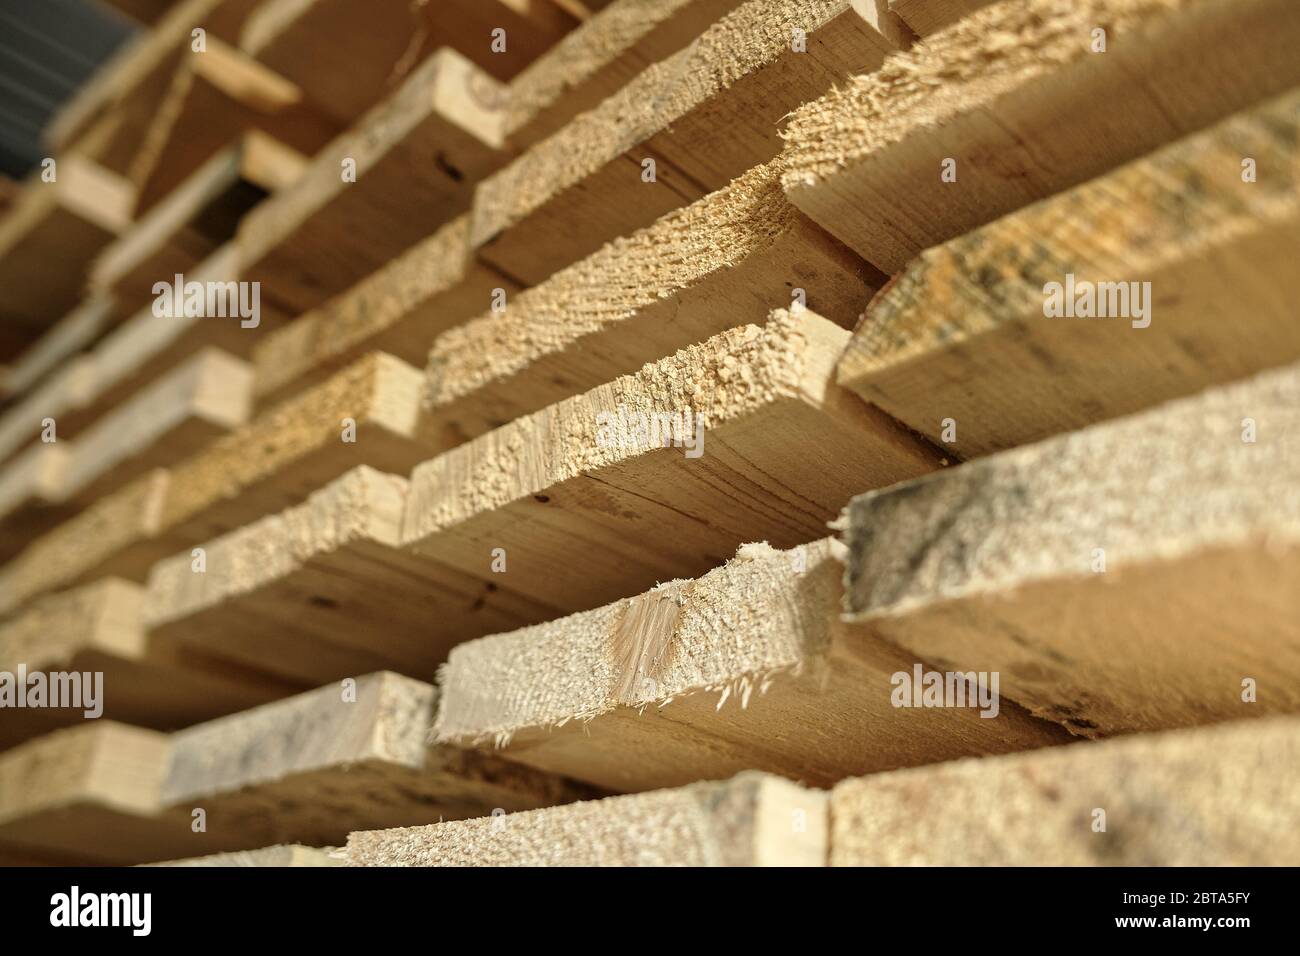 Construction lumber. Dry boards are stacked. A close-up of wood in the end. the woodworking industry and sawmills Stock Photo